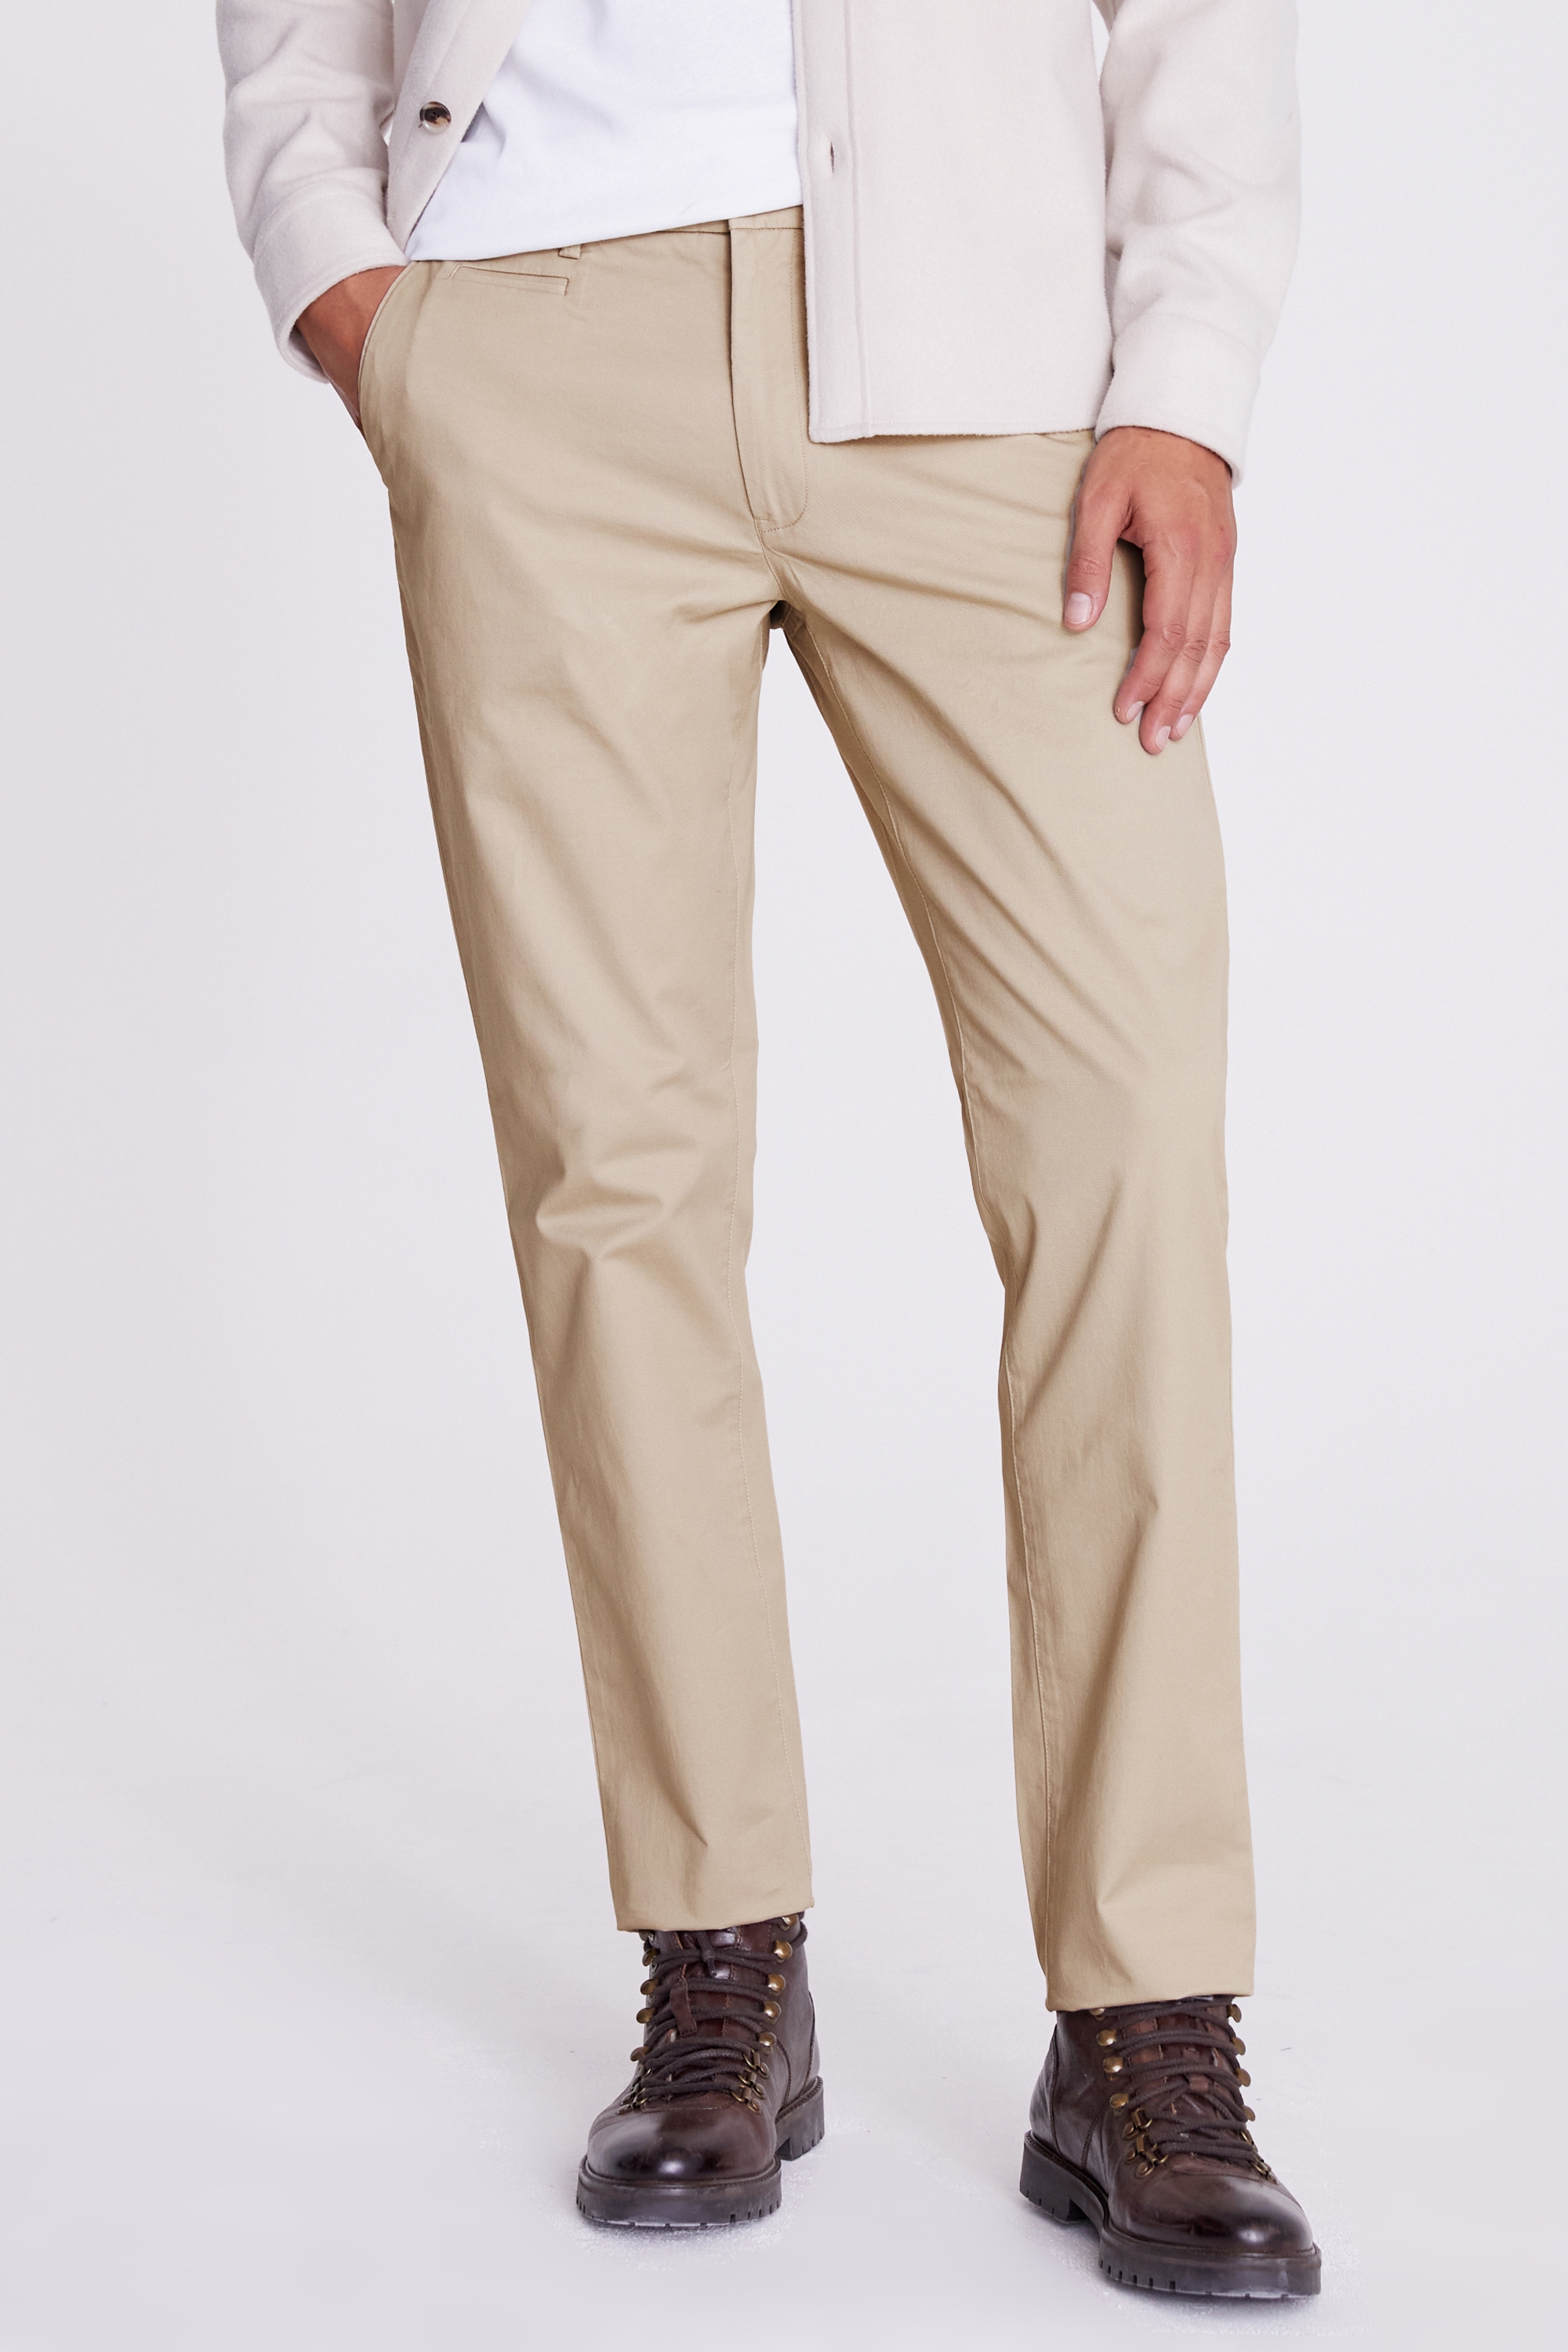 Jeff Banks  Mens Grey Stretch Chinos  SuitDirectcouk